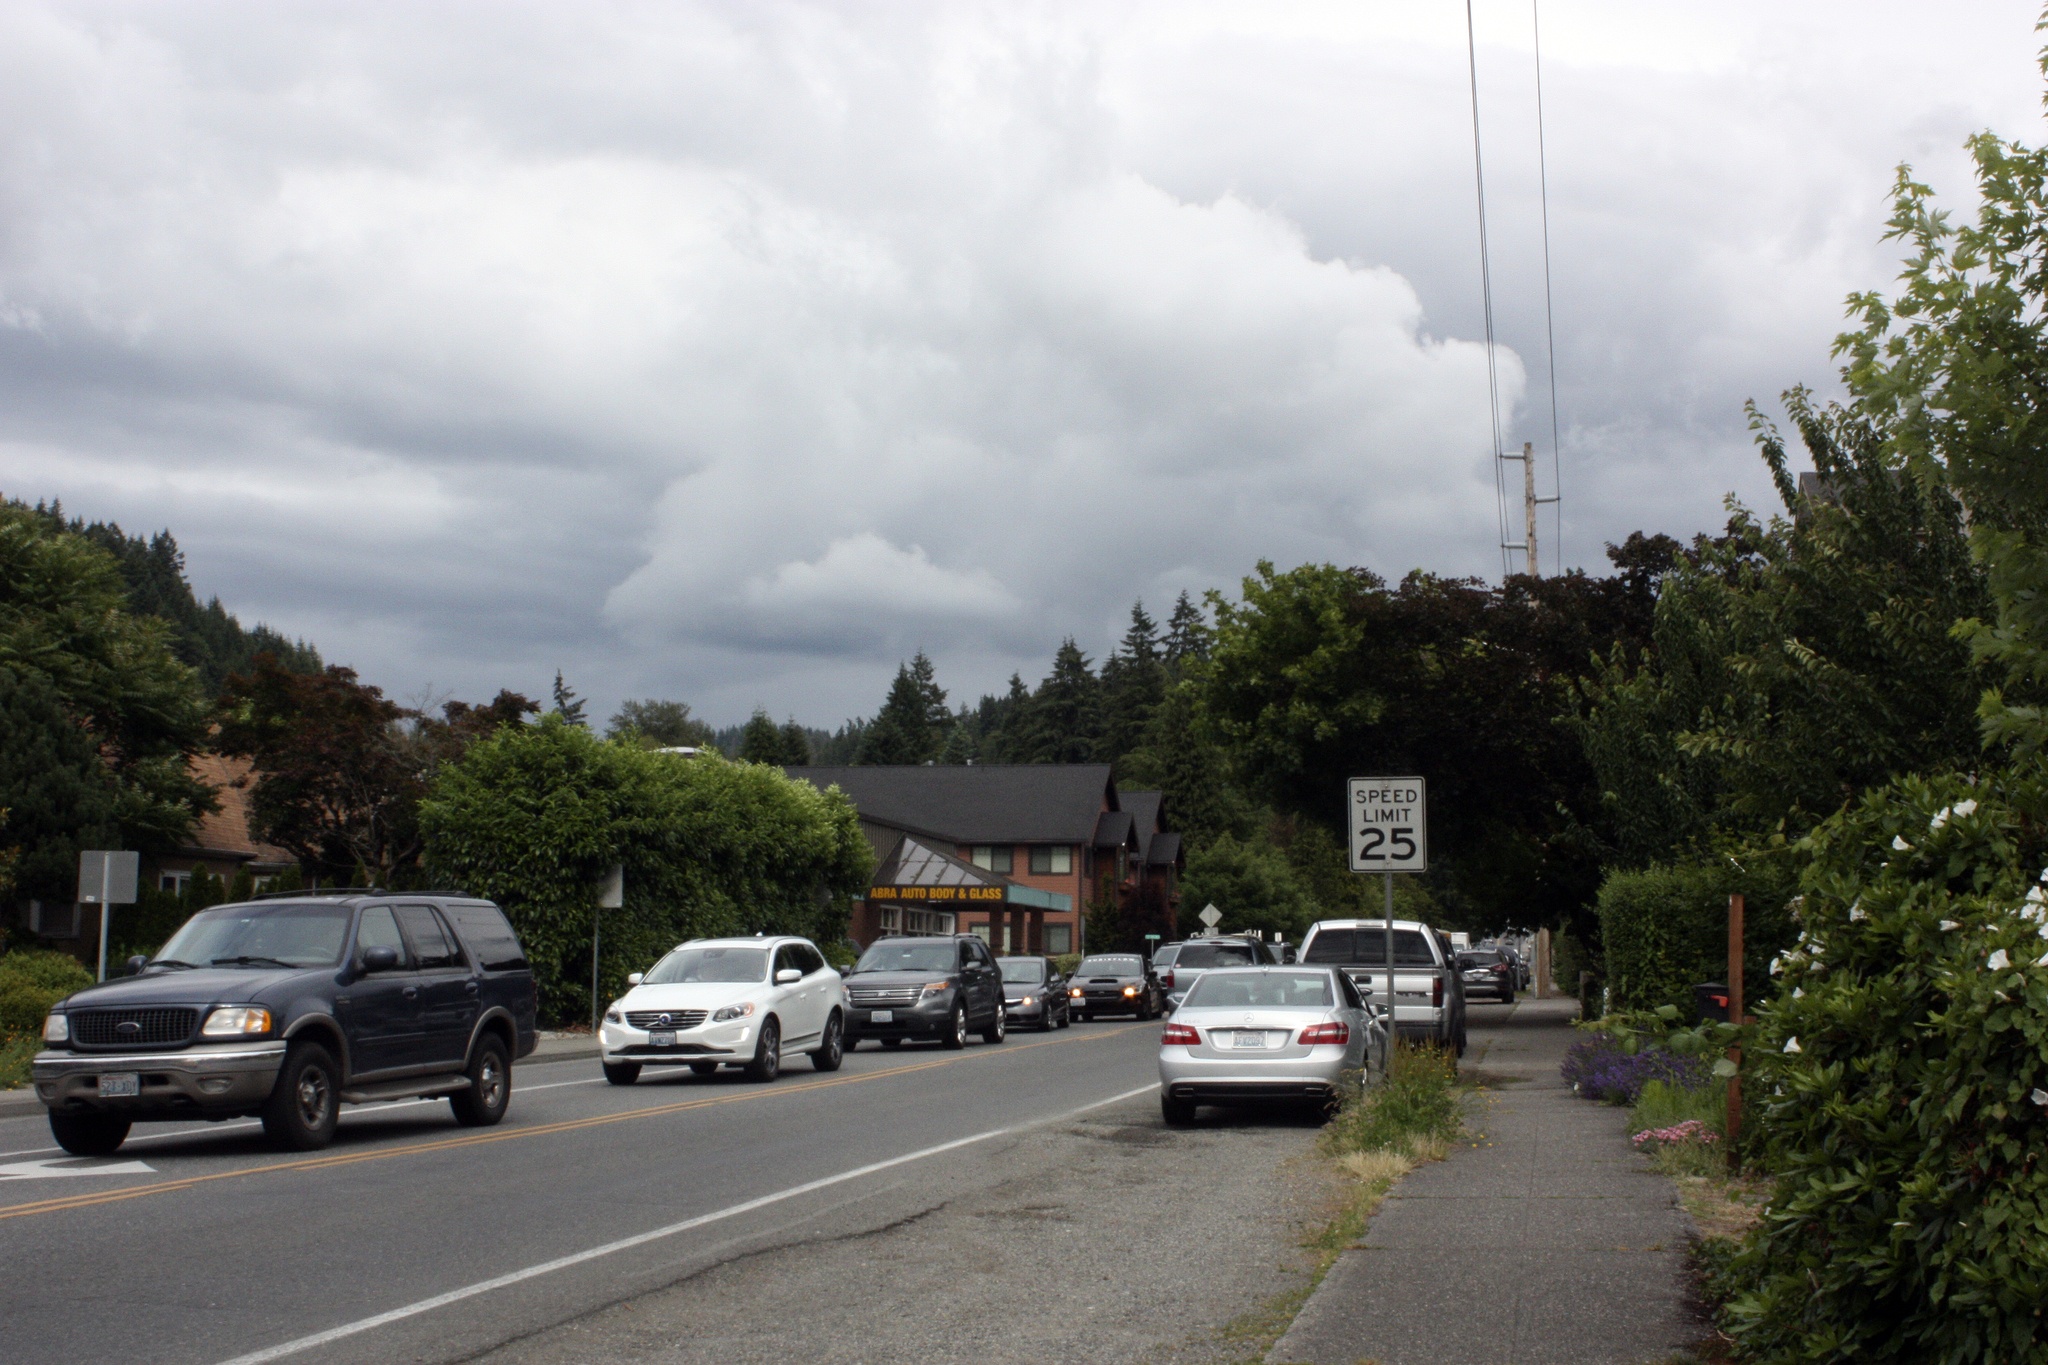 East Sunset Way regularly sees long lines of cars backed up